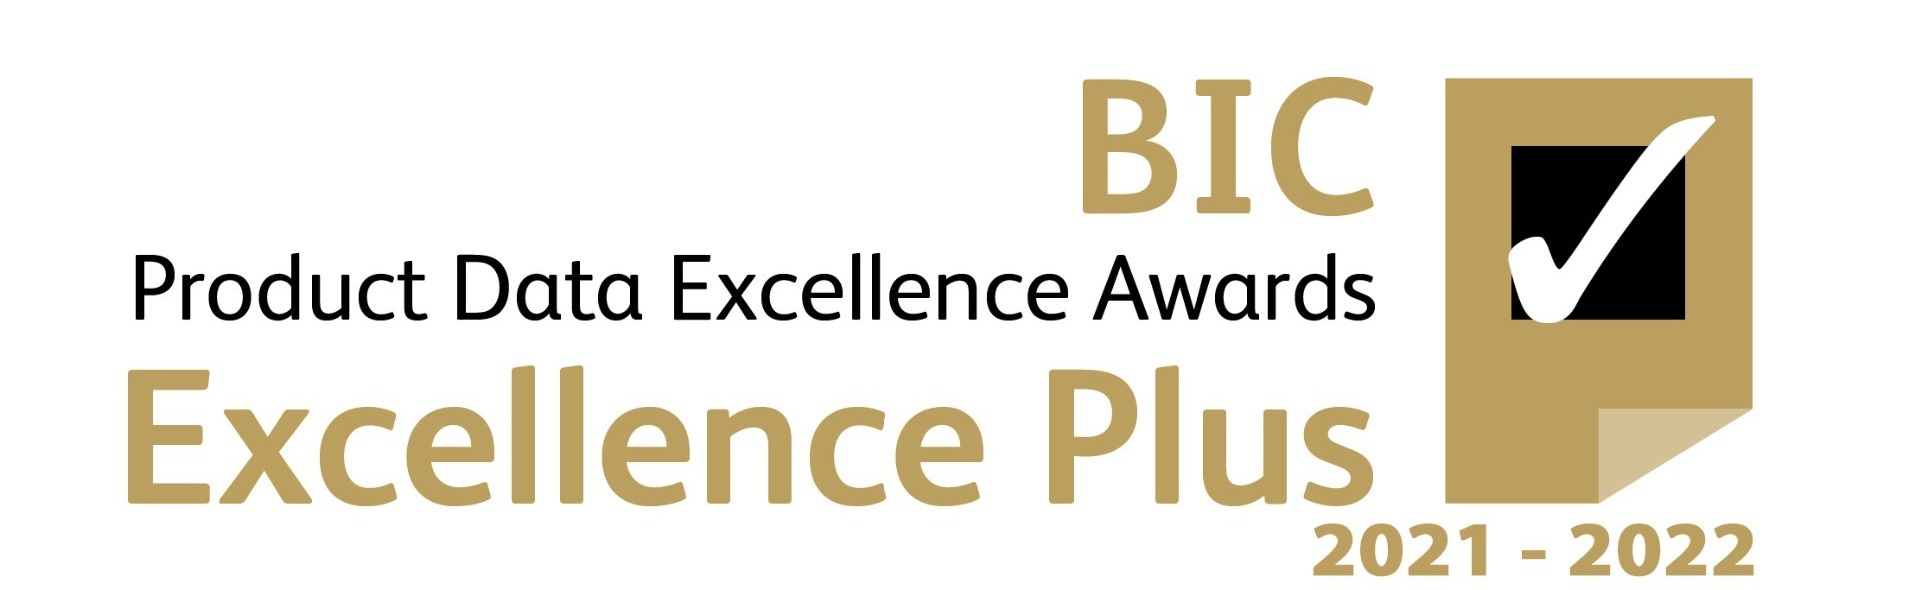 BIC Product Date Excellence Awards